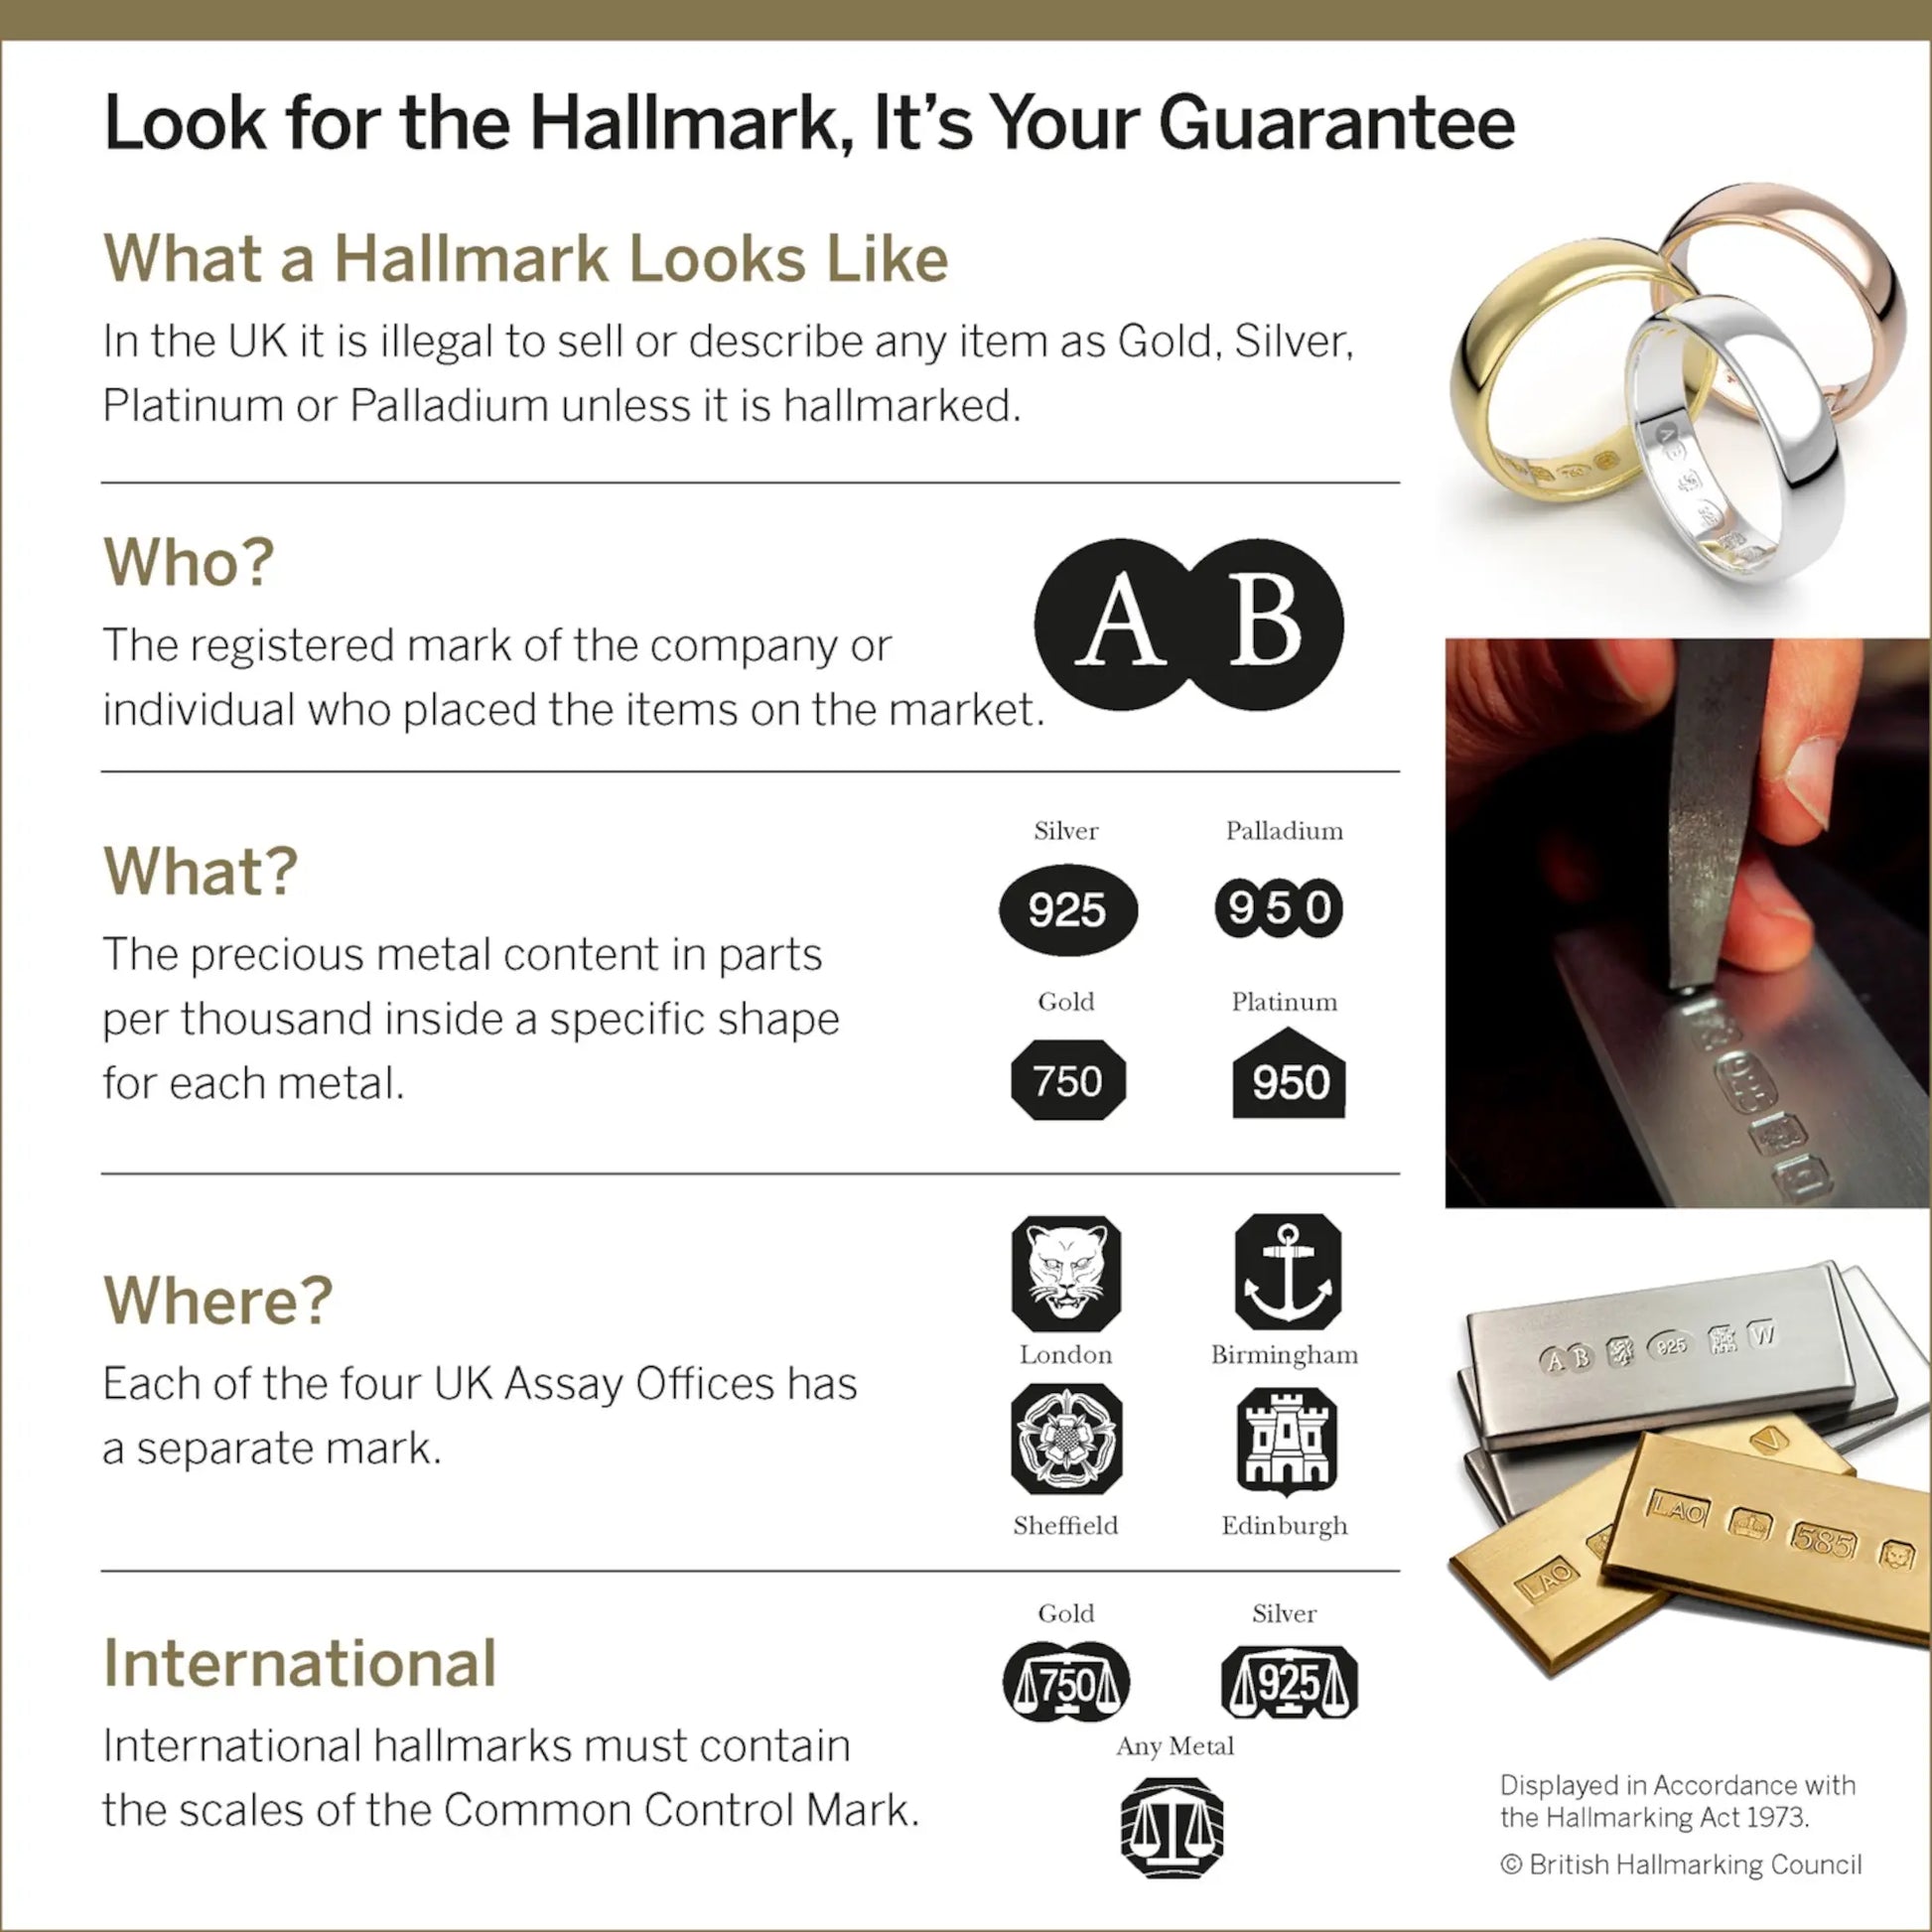 Official Dealers Notice.  Look for the Hallmark, It’s Your Guarantee In the UK it is illegal to supply or offer to supply any item as Gold, Silver, Platinum or Palladium unless it is hallmarked.* The registered mark of the company or individual who placed the items on the market. The precious metal content in parts per thousand inside a specific shape for each metal. Each of the four UK Assay Offices has a separate mark.